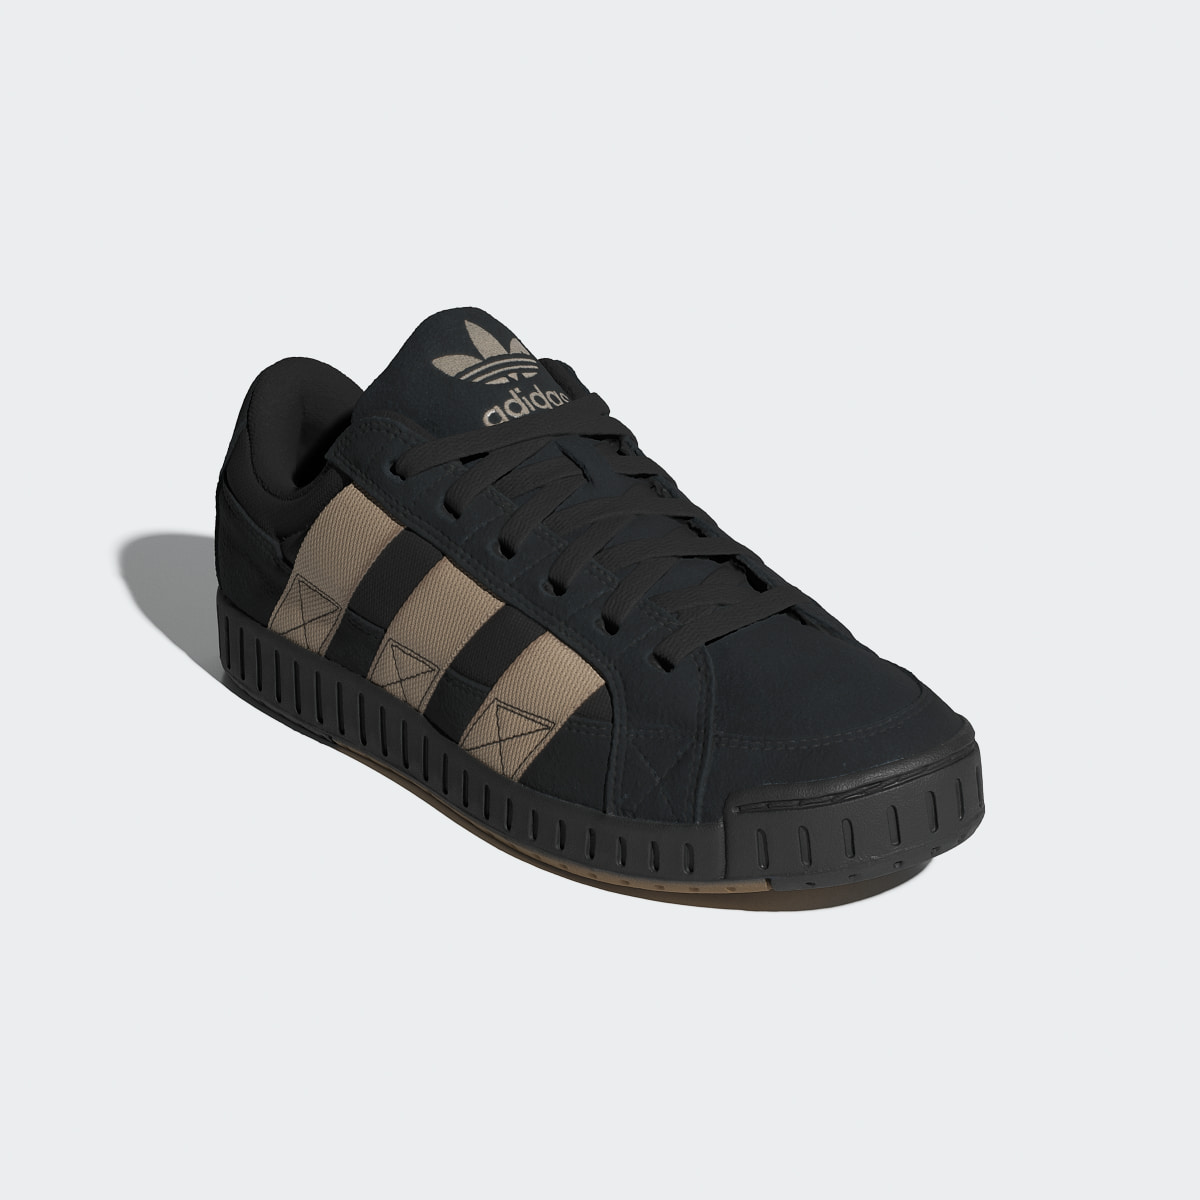 Adidas LWST Shoes. 5